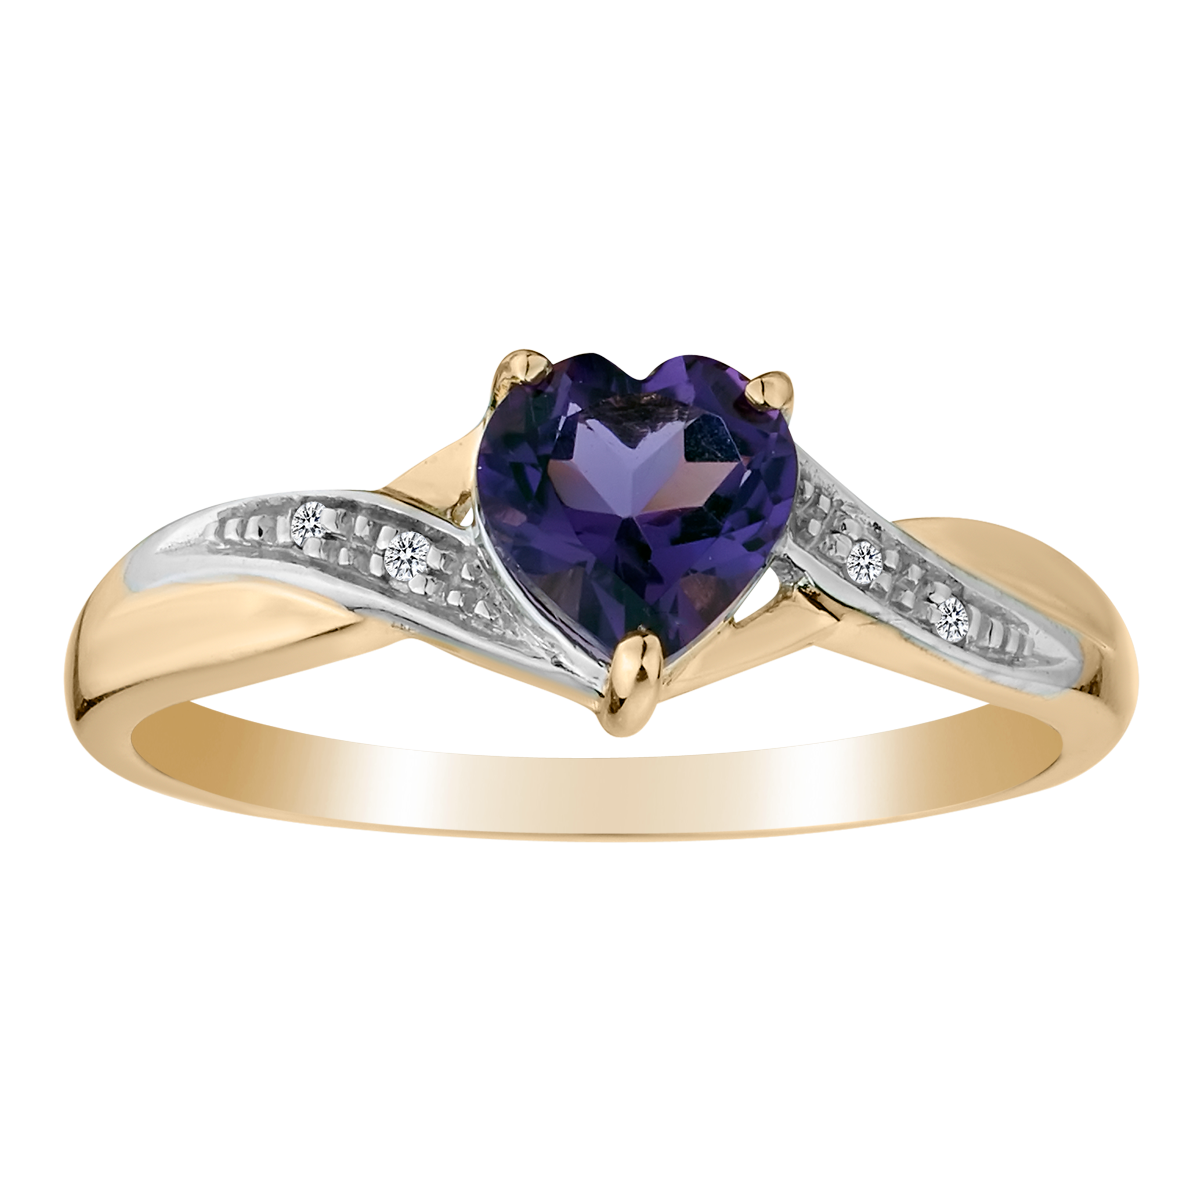 Genuine Amethyst and Diamond Ring, 10kt Yellow Gold.......................NOW